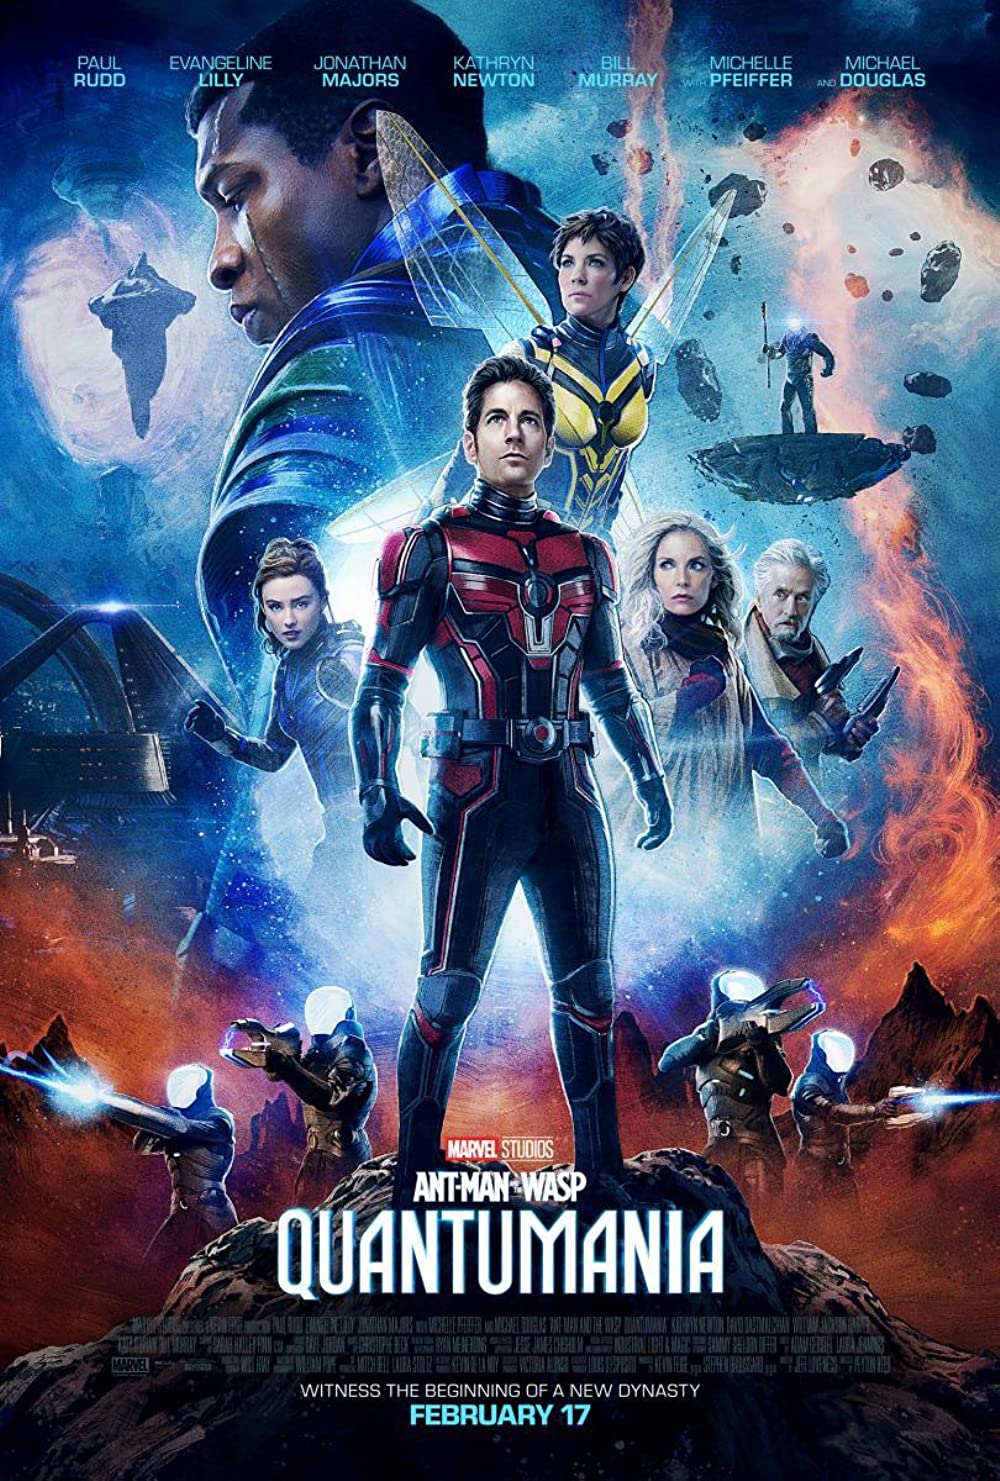 Ant-Man and the Wasp: Quantumania Blockbuster Film